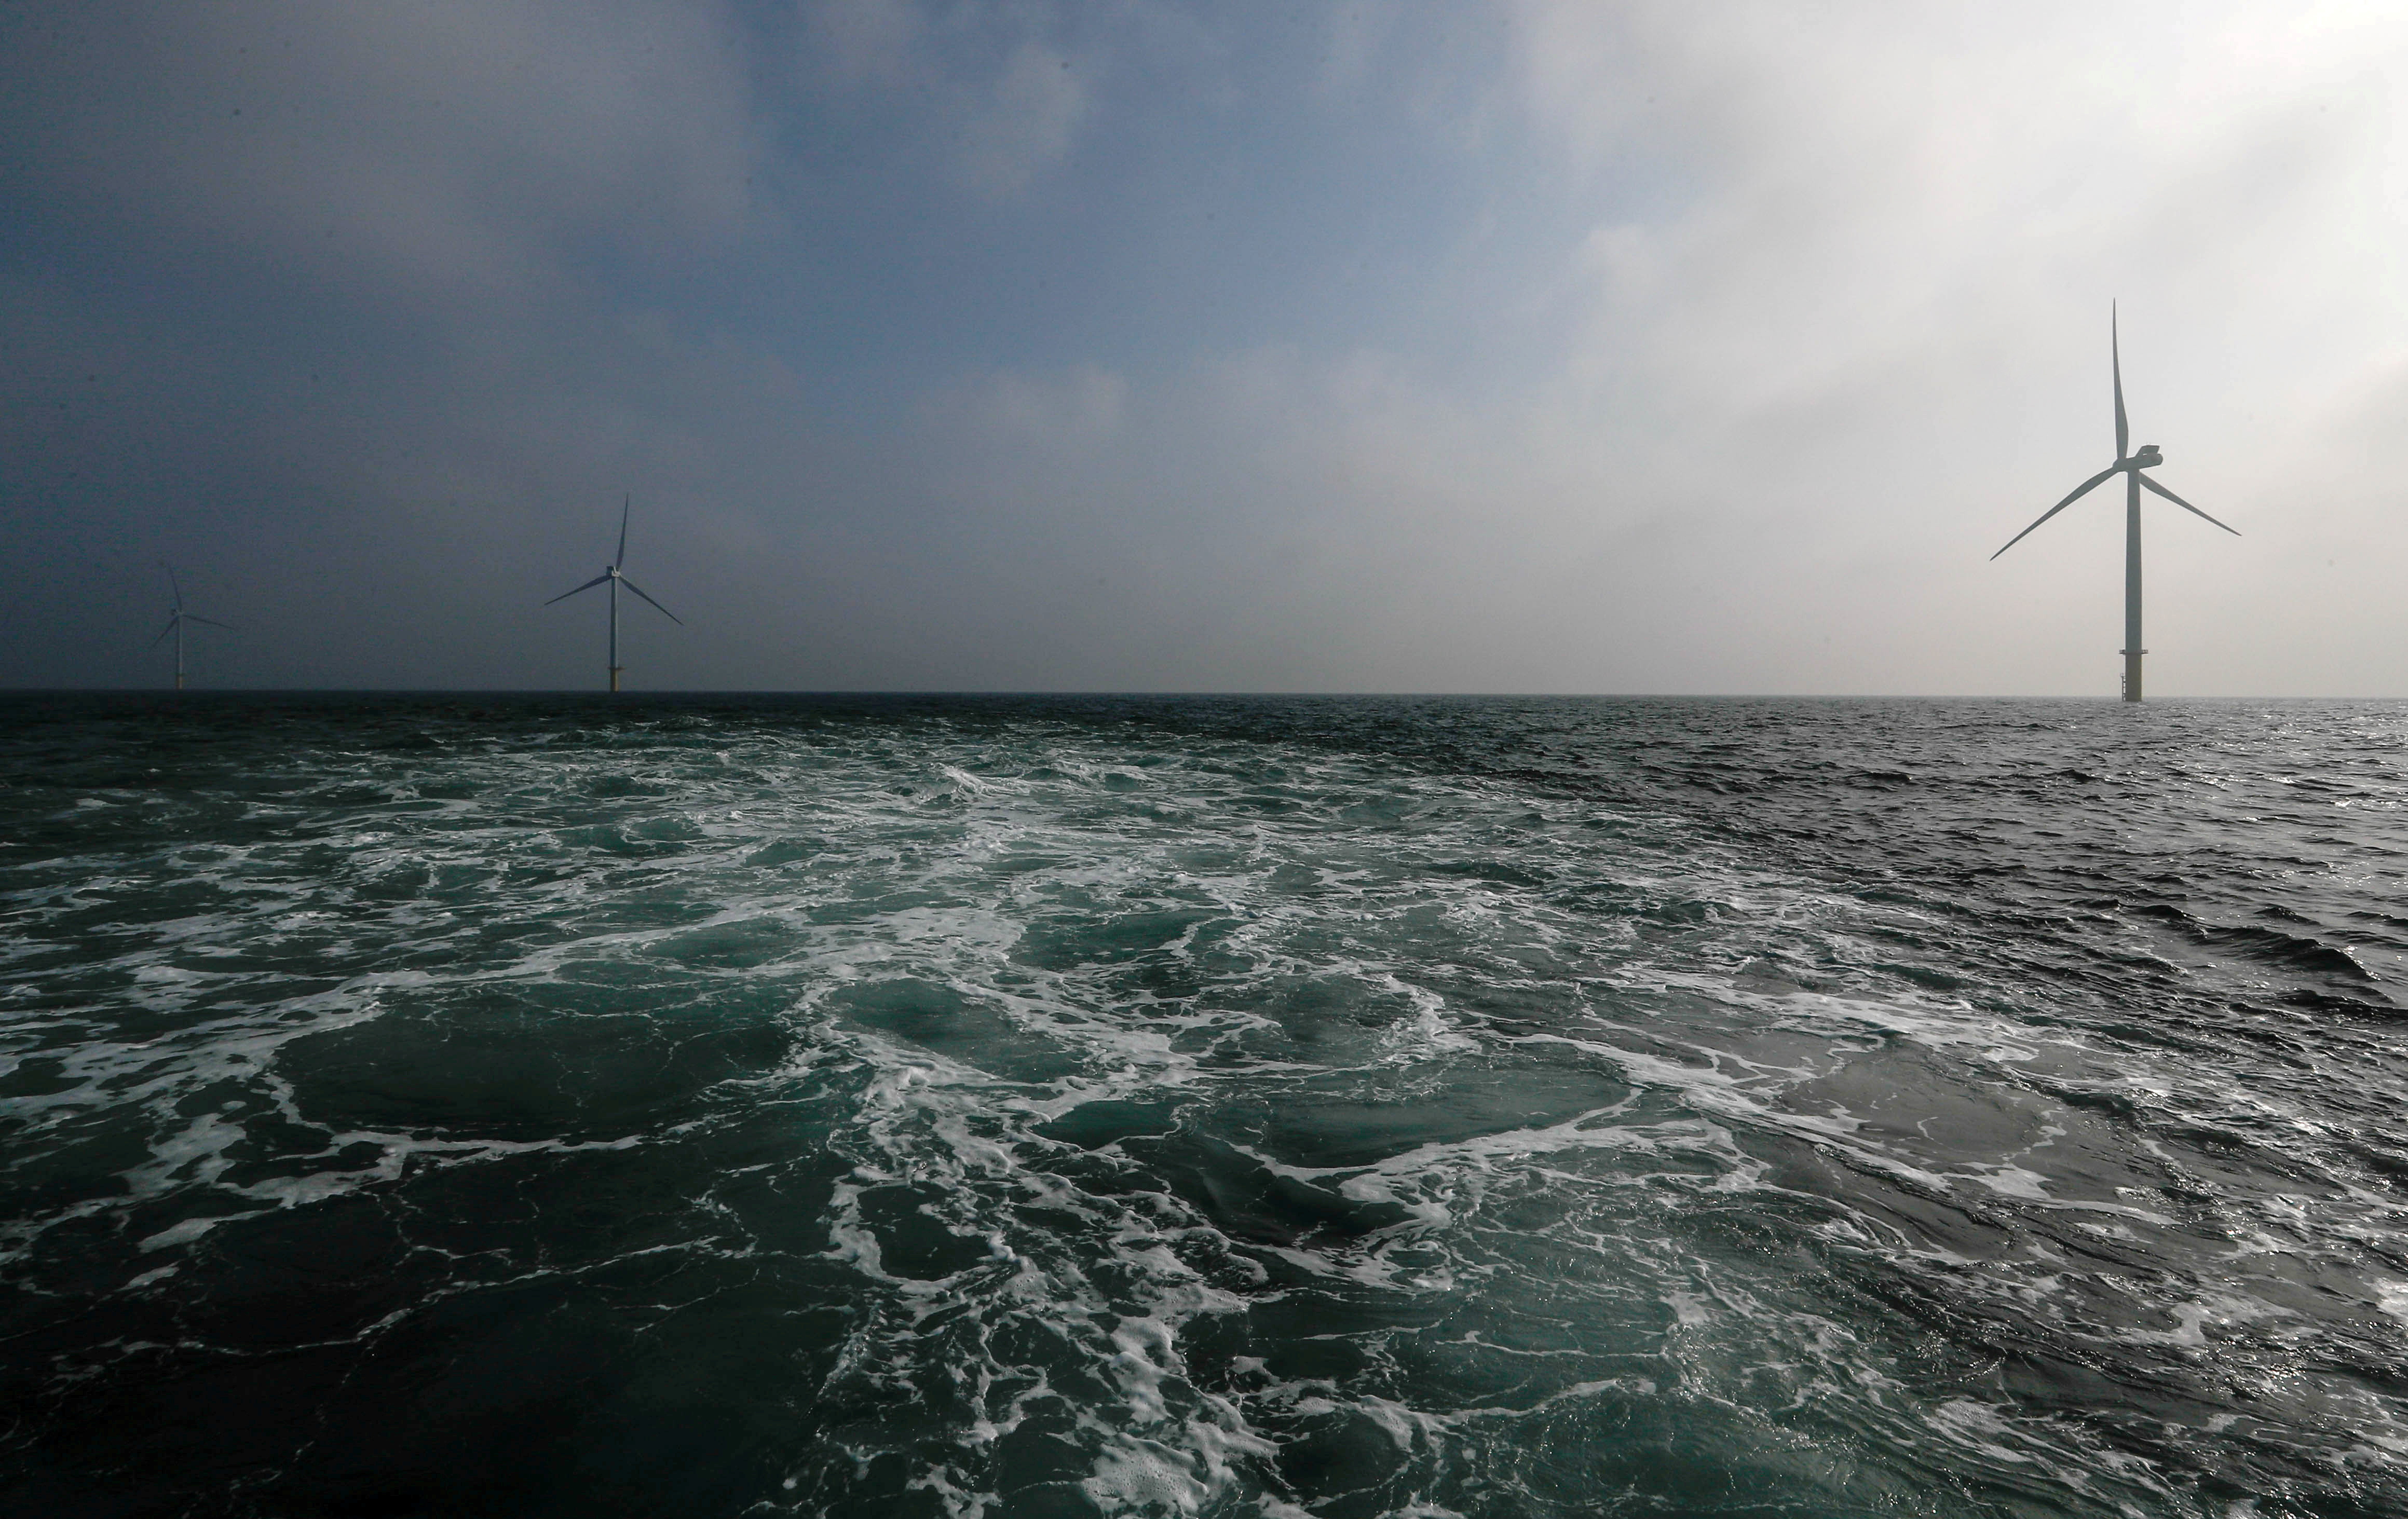 Power-generating windmill turbines are seen at the Eneco Luchterduinen offshore wind farm near Amsterdam, Netherlands September 26, 2017.   REUTERS/Yves Herman